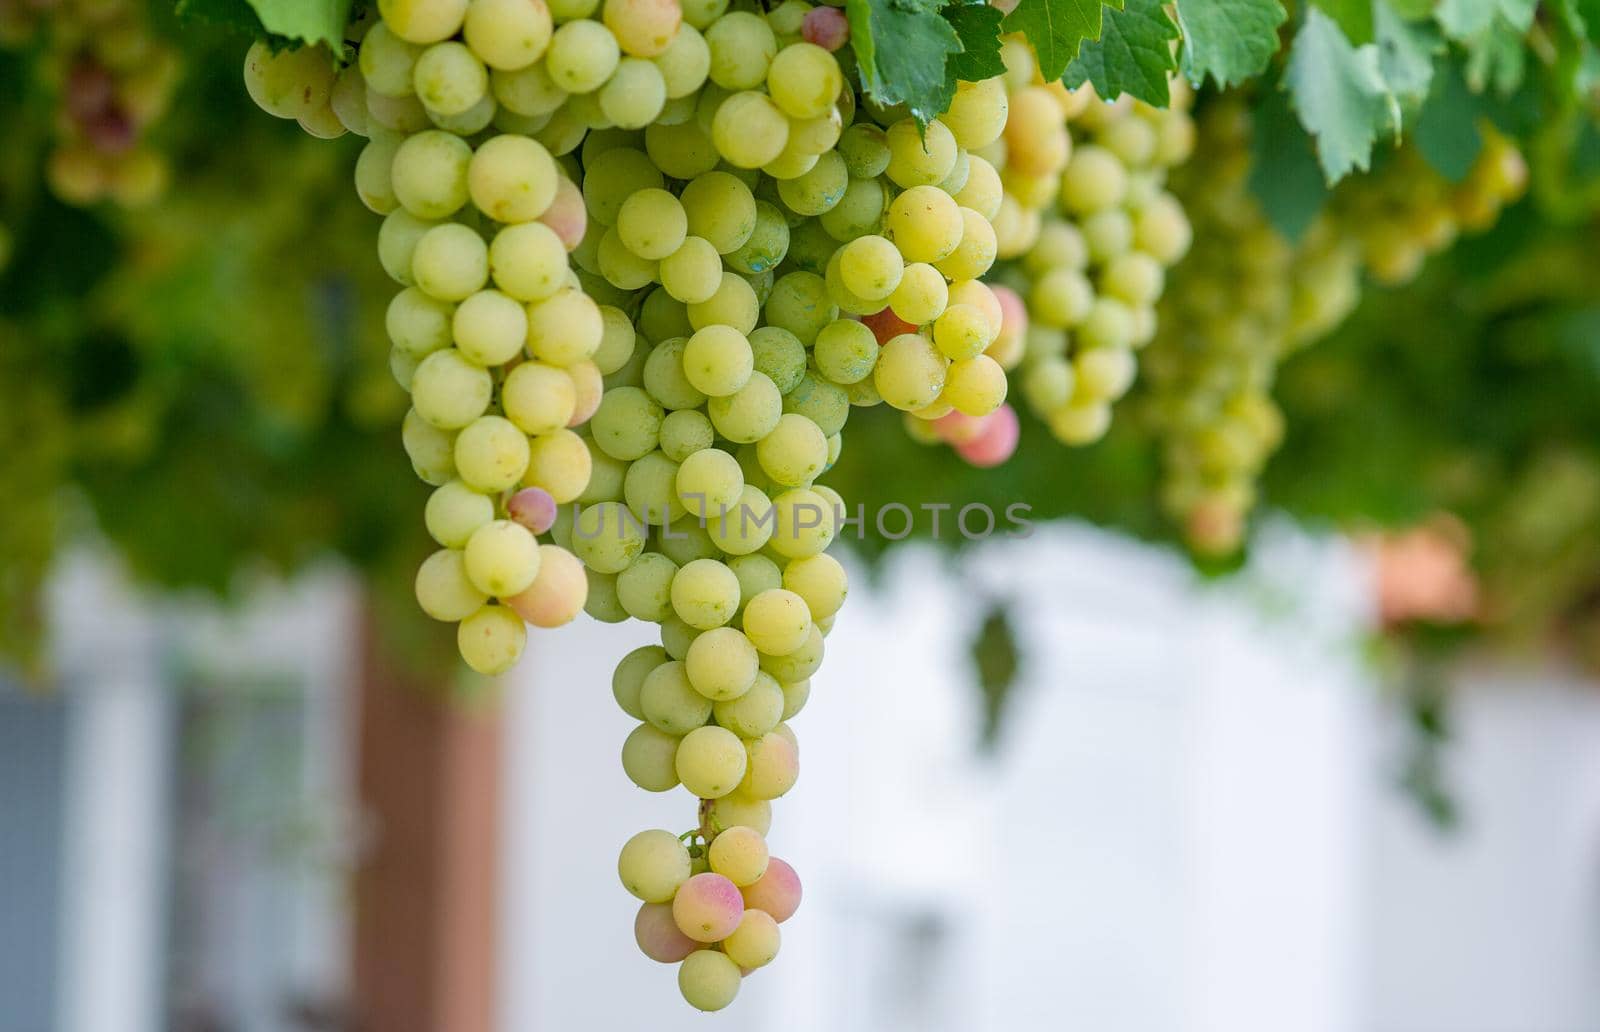 Grapes ready for picking in early autumn with almost yellow berries waiting to be picked